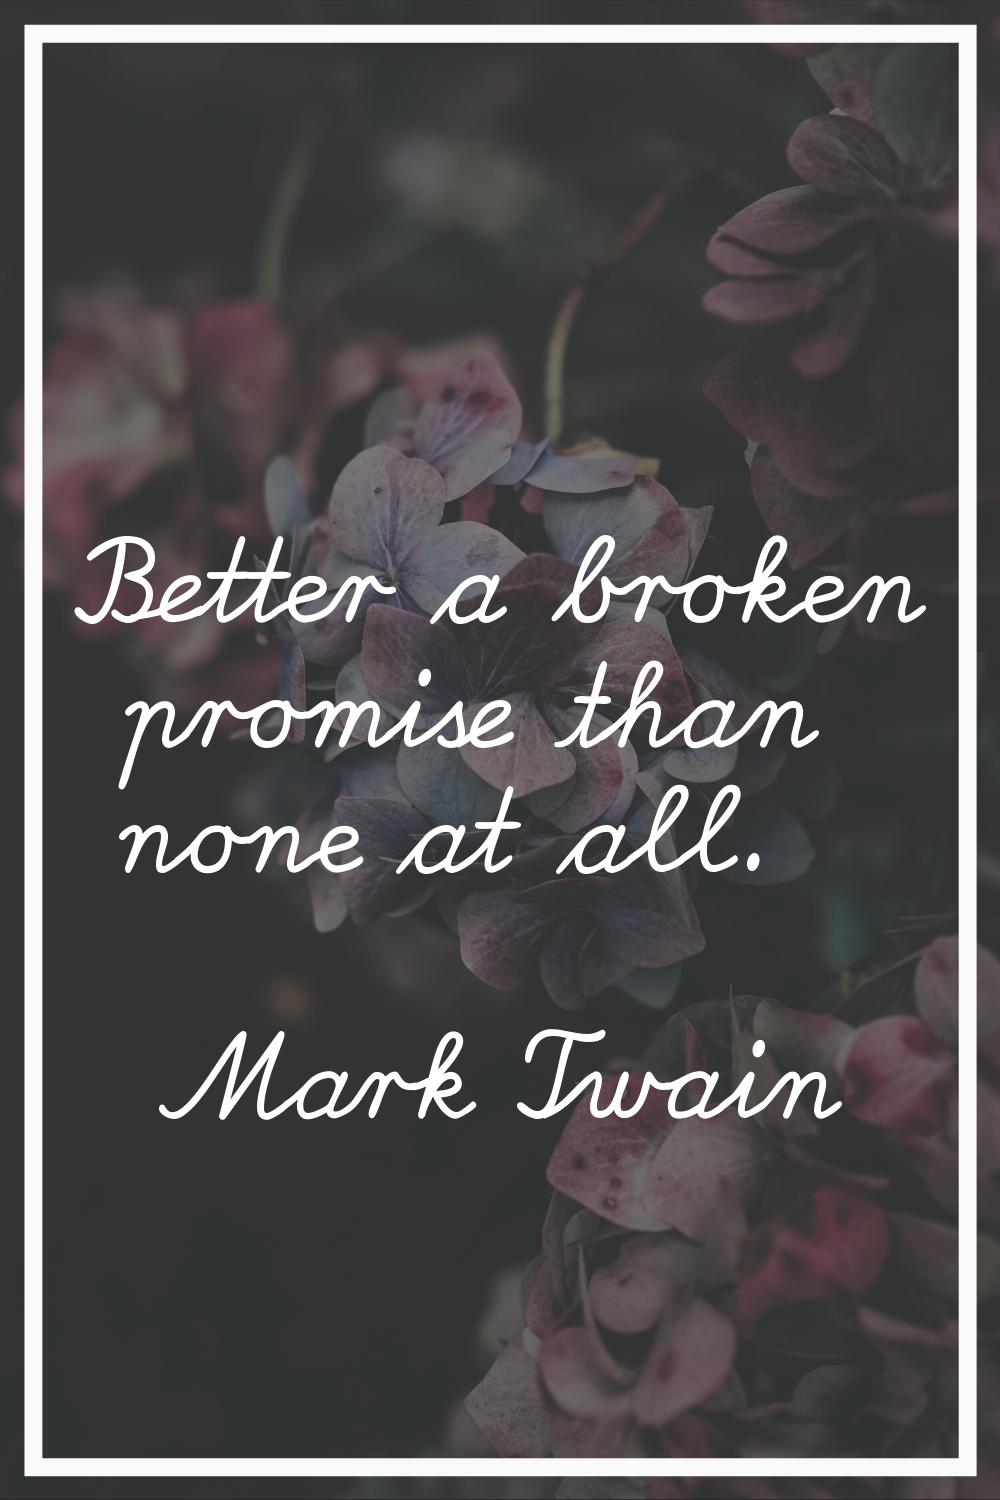 Better a broken promise than none at all.